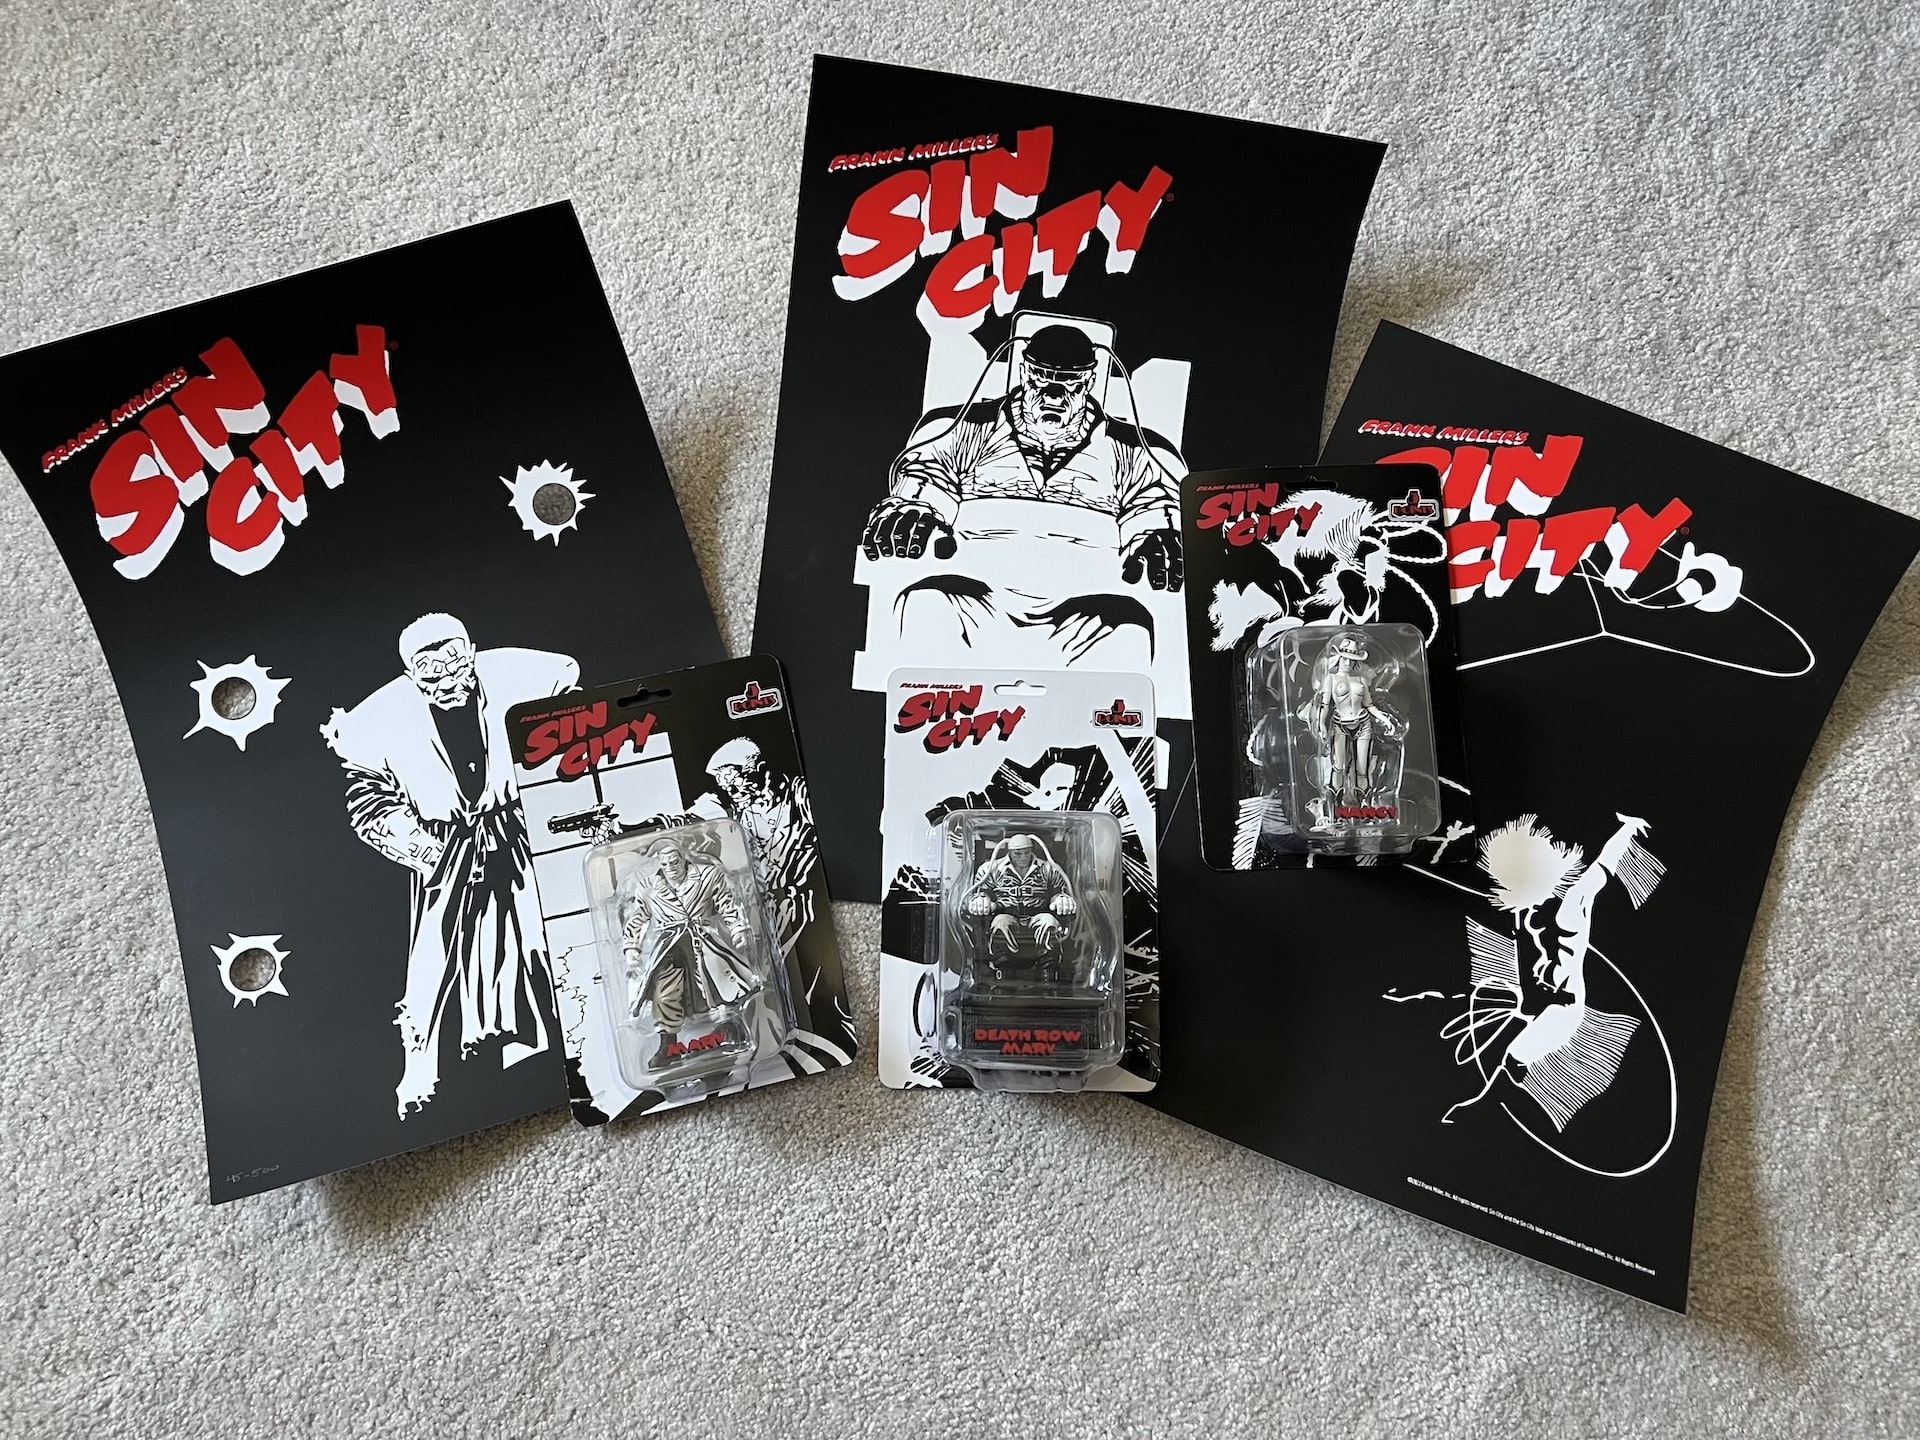 5 POINTS Sin City: The Hard Goodbye Collector’s Capsule review